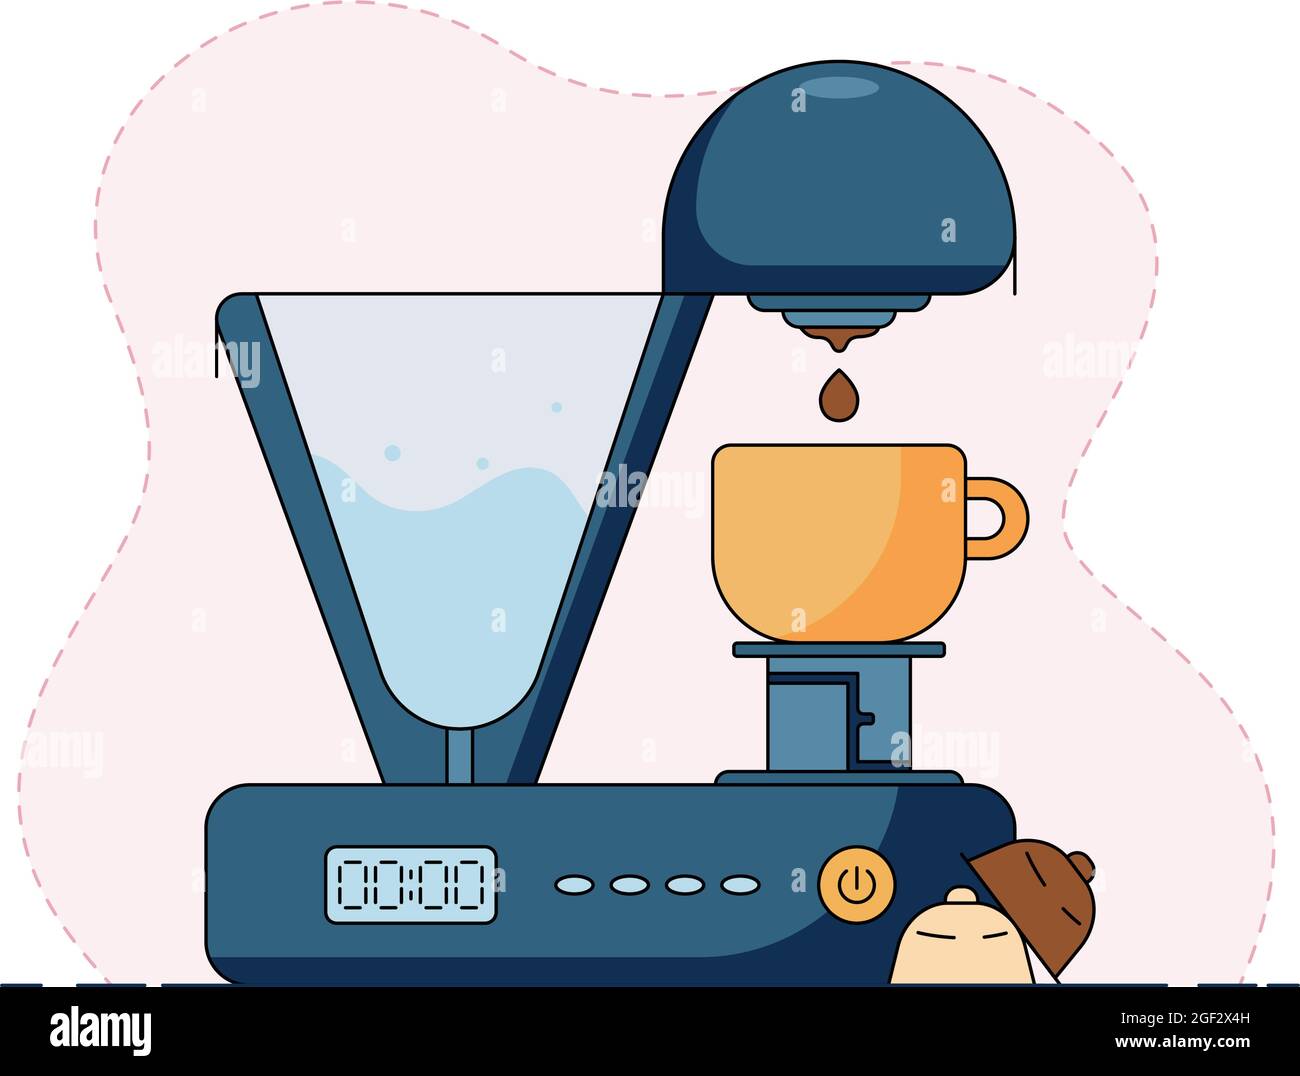 Vector illustration of coffee machine with capsules of coffee and milk, brewing coffee in a yellow mug. Illustration in a flat style, with abstract Stock Vector